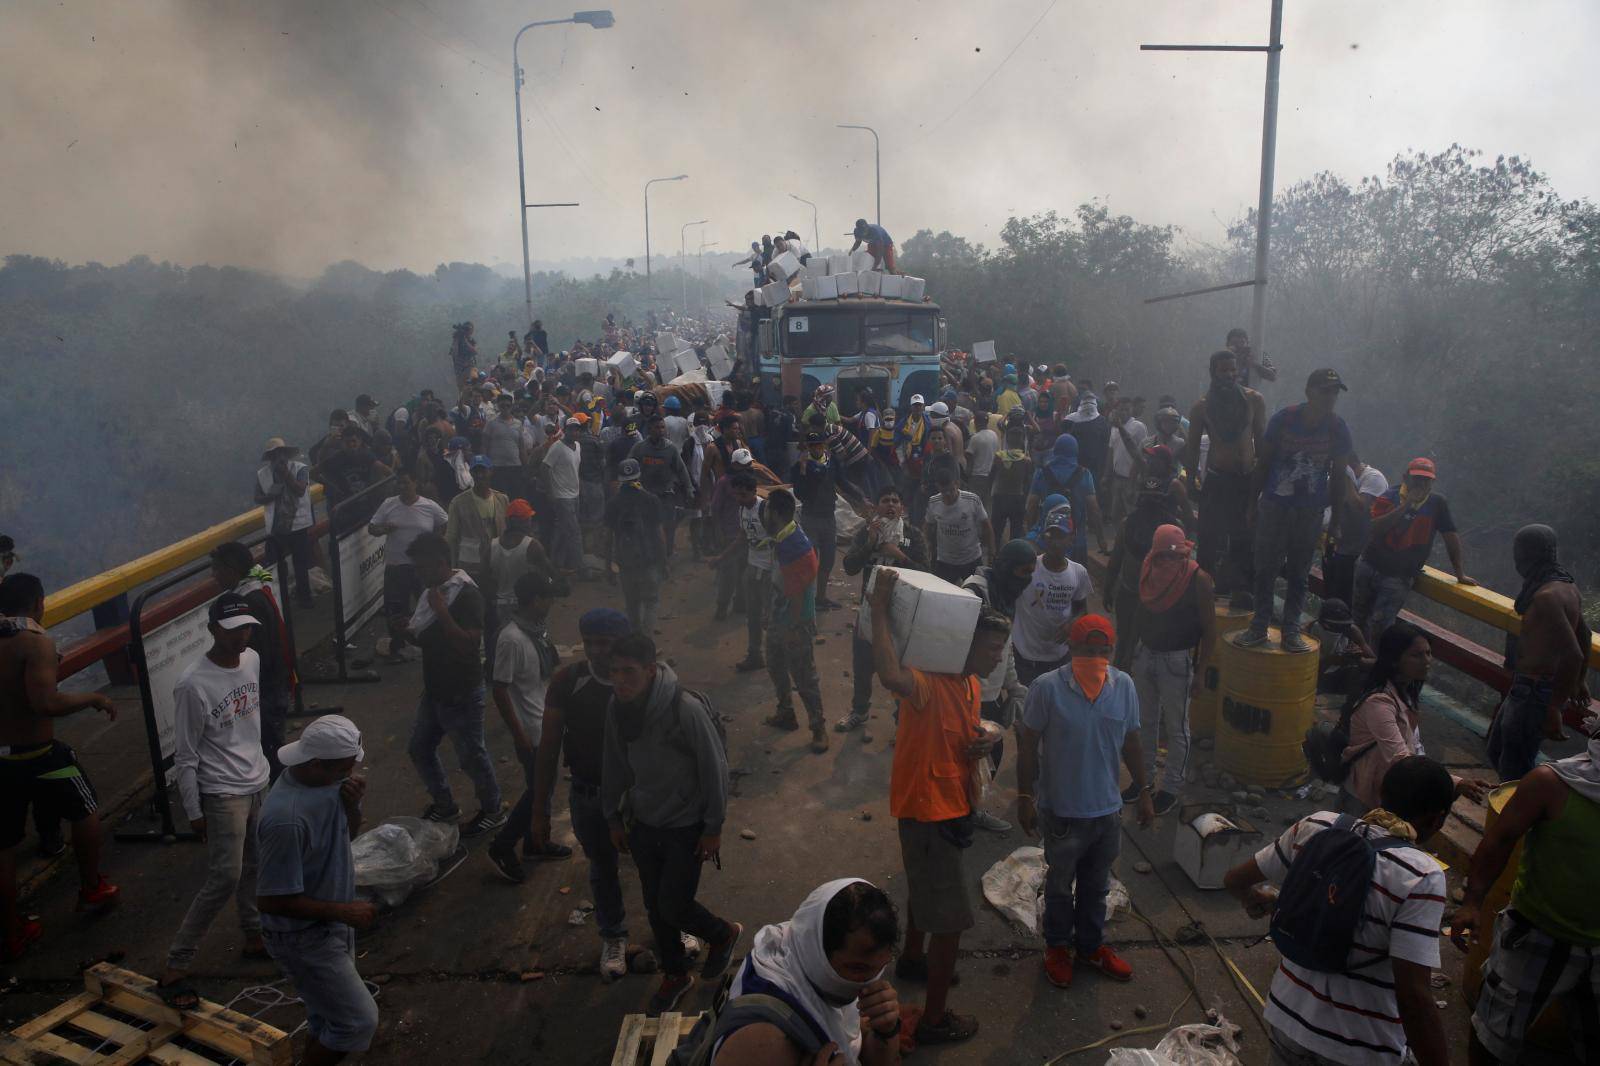 Opposition supporters unload humanitarian aid from a truck that was sent on fire in Cucuta